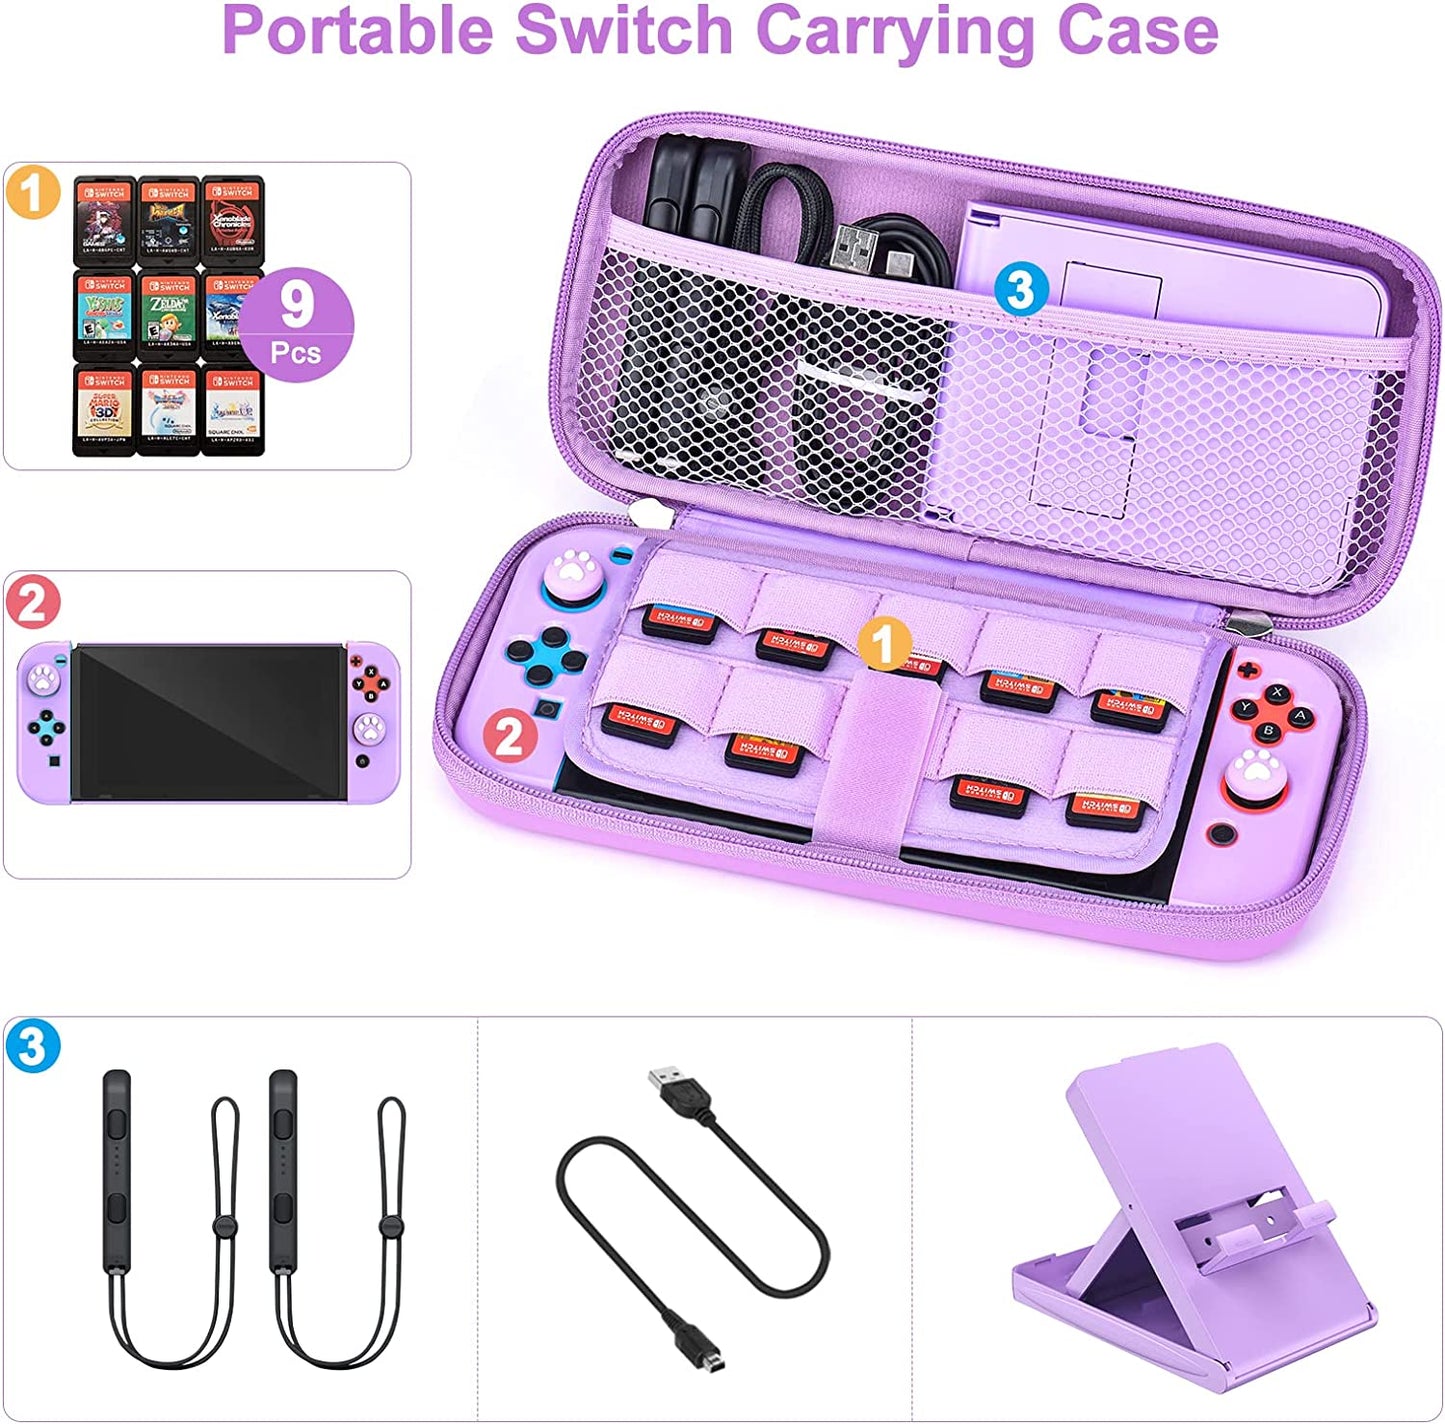  15-in-1 Switch Accessories Bundle - Compatible with Switch (NOT Oled/Lite) with Switch Carrying Case, Adjustable Stand, Protective Case for Switch Console & Joy-Con